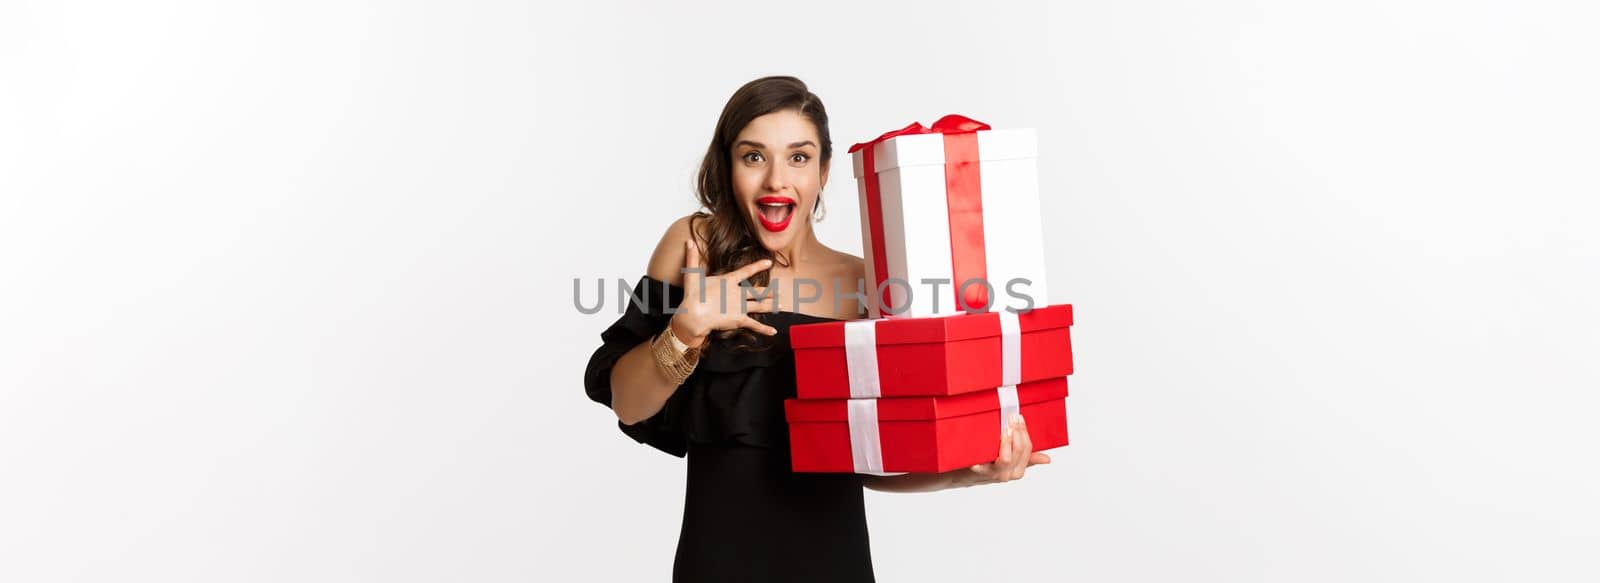 Celebration and christmas holidays concept. Excited and happy woman receive gifts, holding xmas presents and rejoicing, standing in black dress over white background.